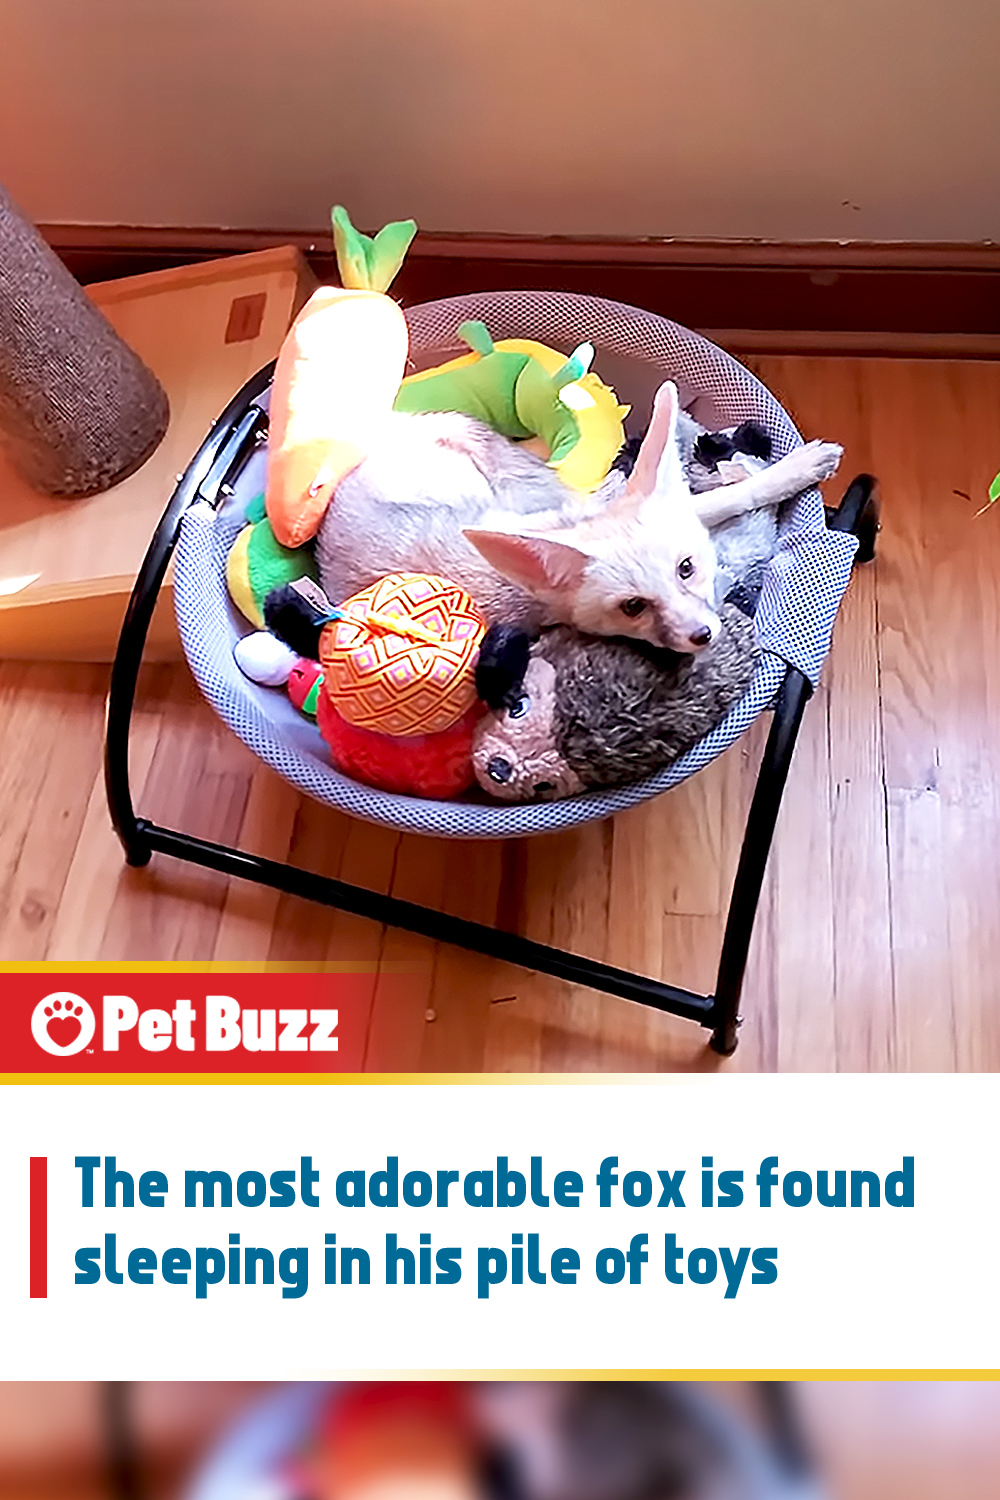 The most adorable fox is found sleeping in his pile of toys